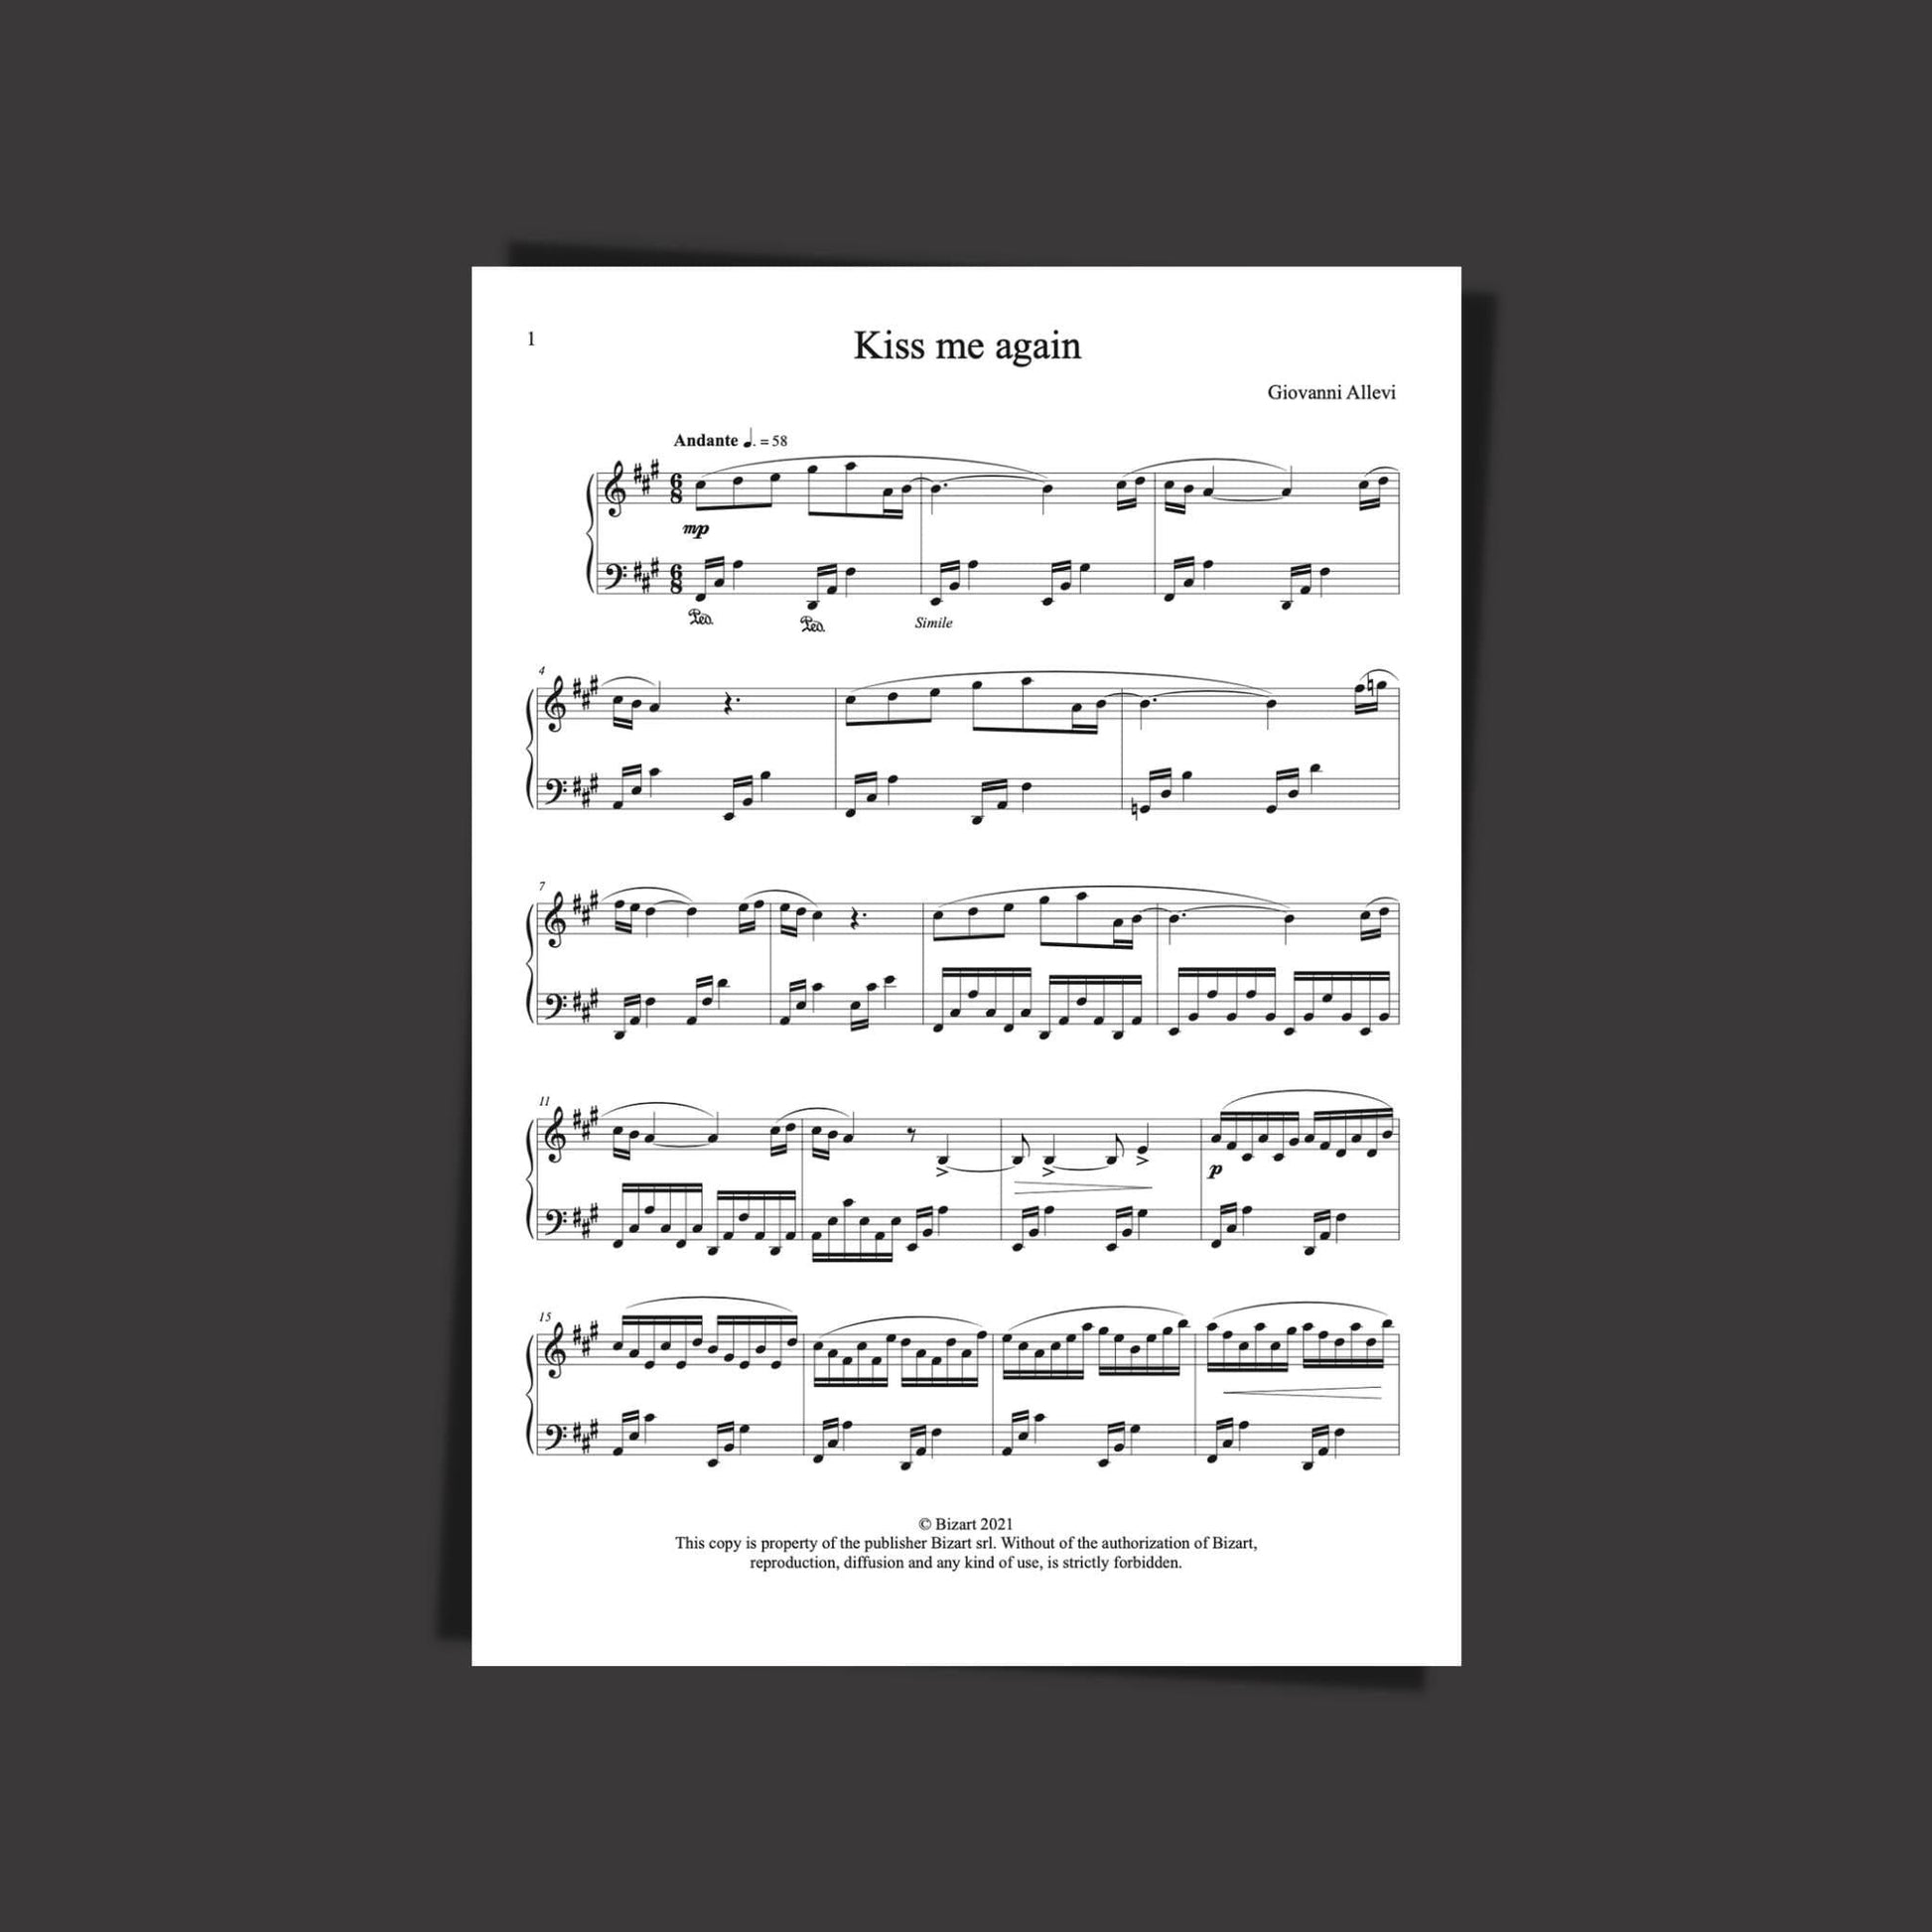 KISS ME AGAIN by composer and pianist GIOVANNI ALLEVI - digital sheet music opening